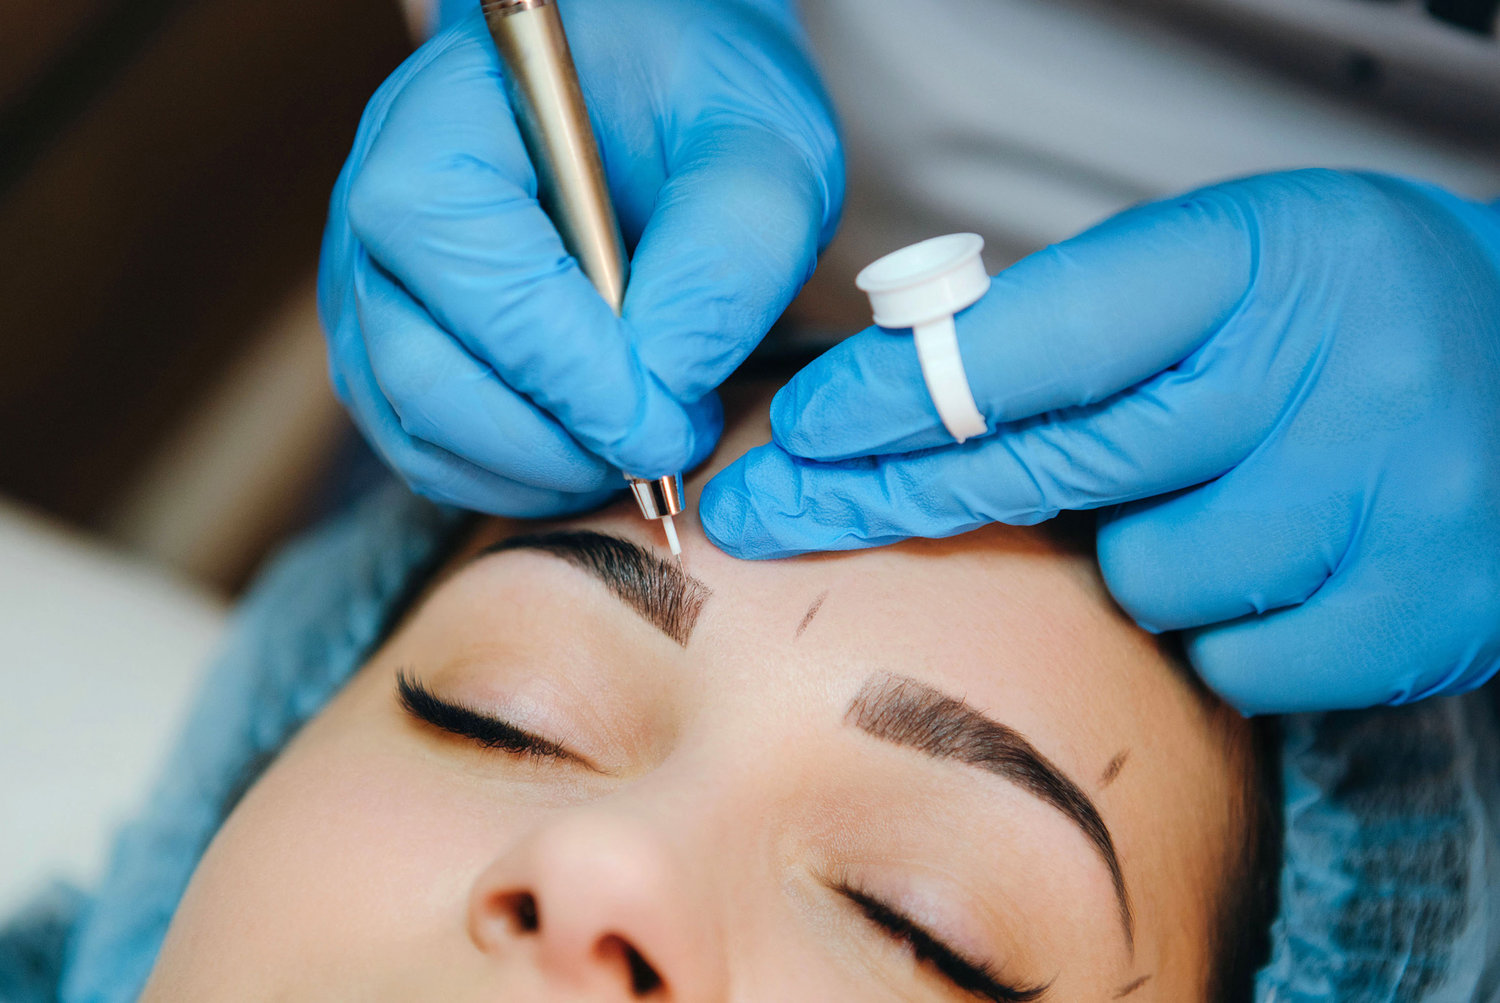 Brows being microbladed